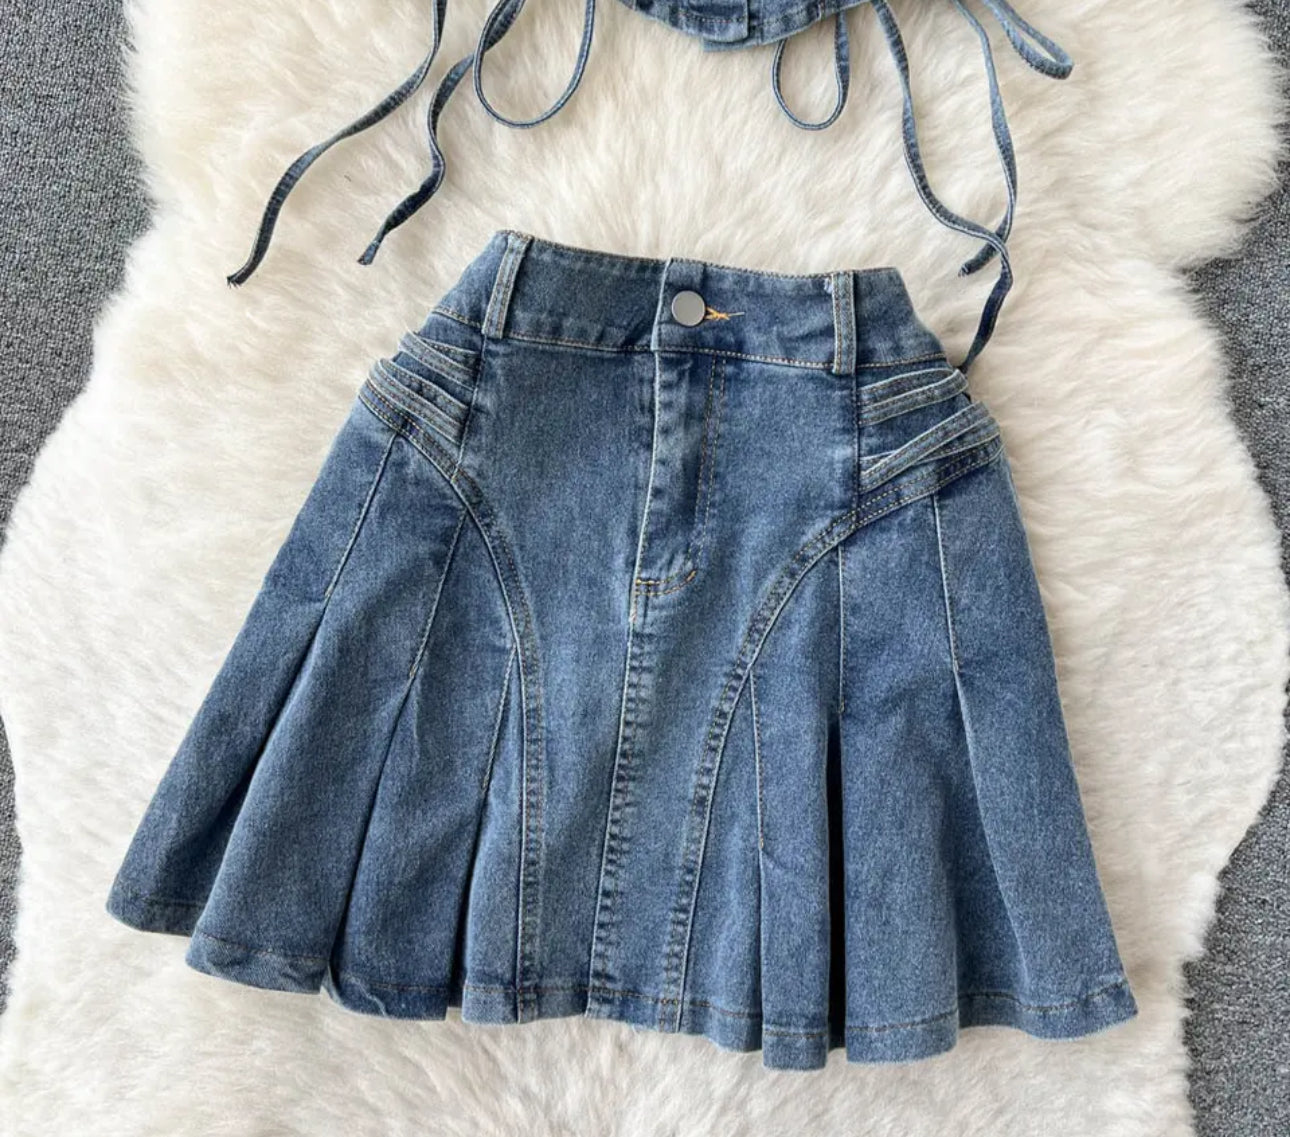 Women's Two Piece Solid Short Sleeve Off Shoulder Frill Trim Party Tie Side Crop Denim Blouse Shirts and Top